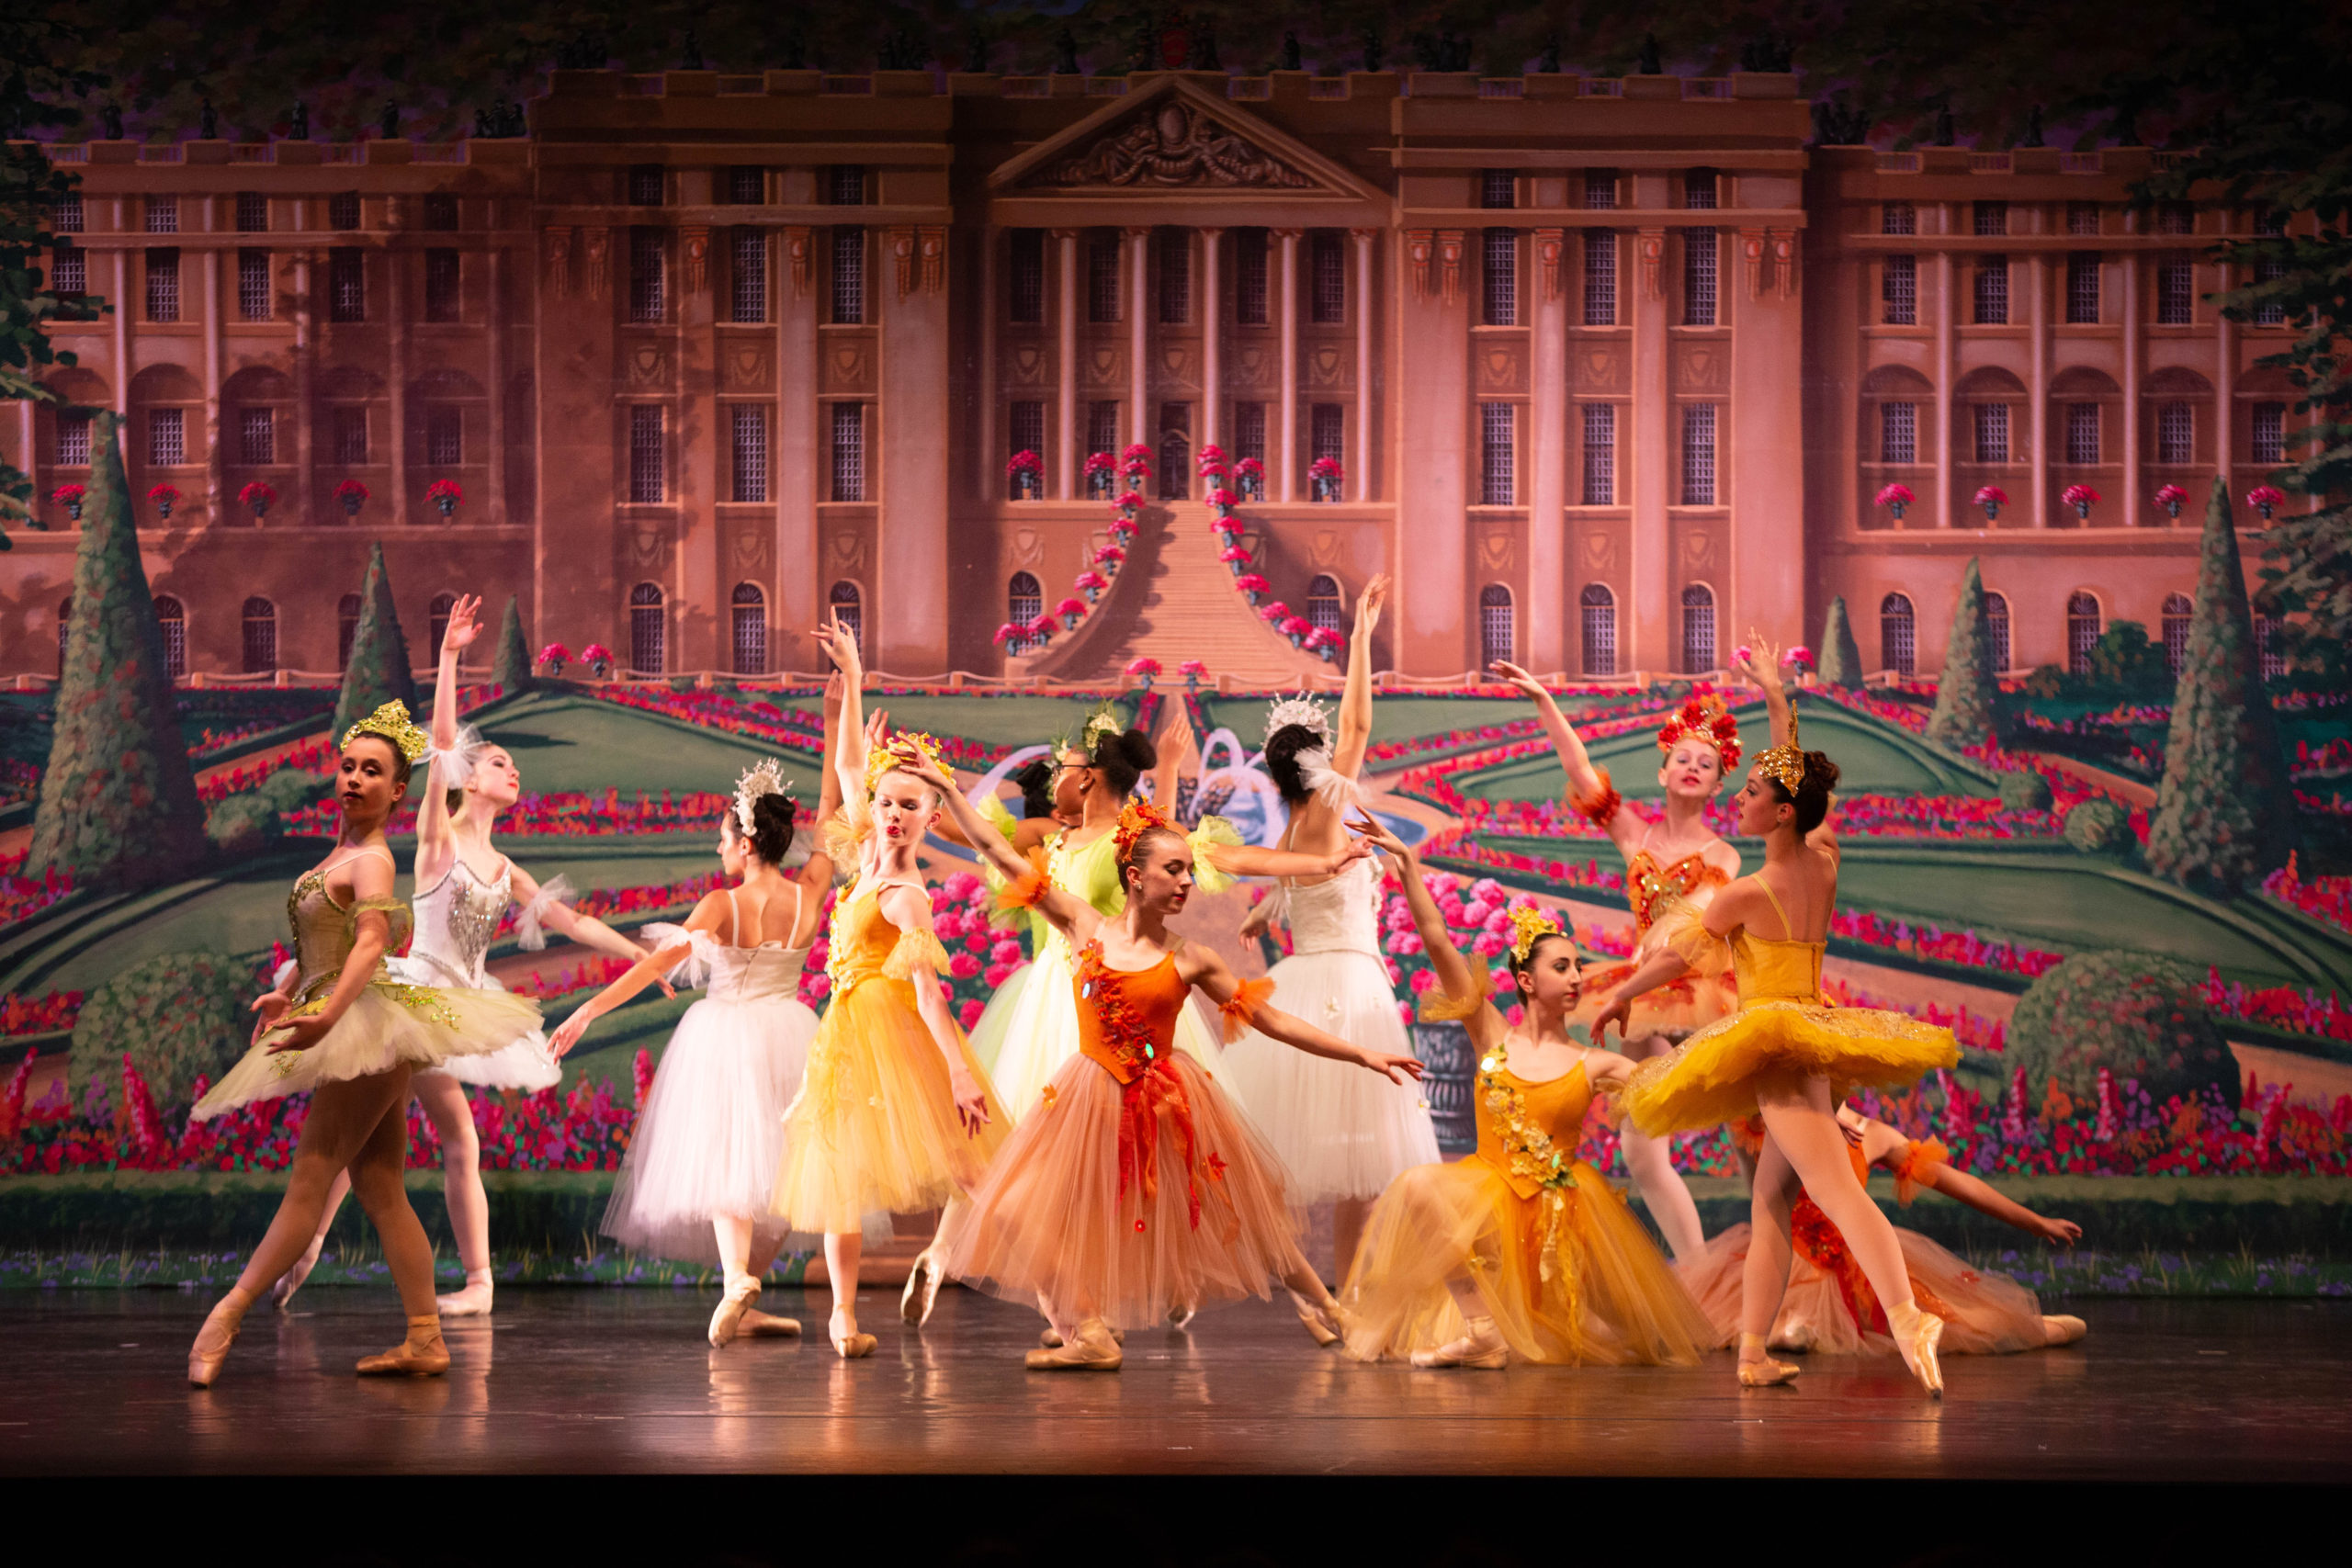 A group of young female dancers pose in a tableau onstage in front of a backdrop showing a grand palace with rose gardens. They wear tuts in various colors and lengths. Cassidy Jarvis poses in the middle in a tendu derriere in plié, wearing an orange Romantic-length tutu with floral details on the bodice and a floral headpiece.